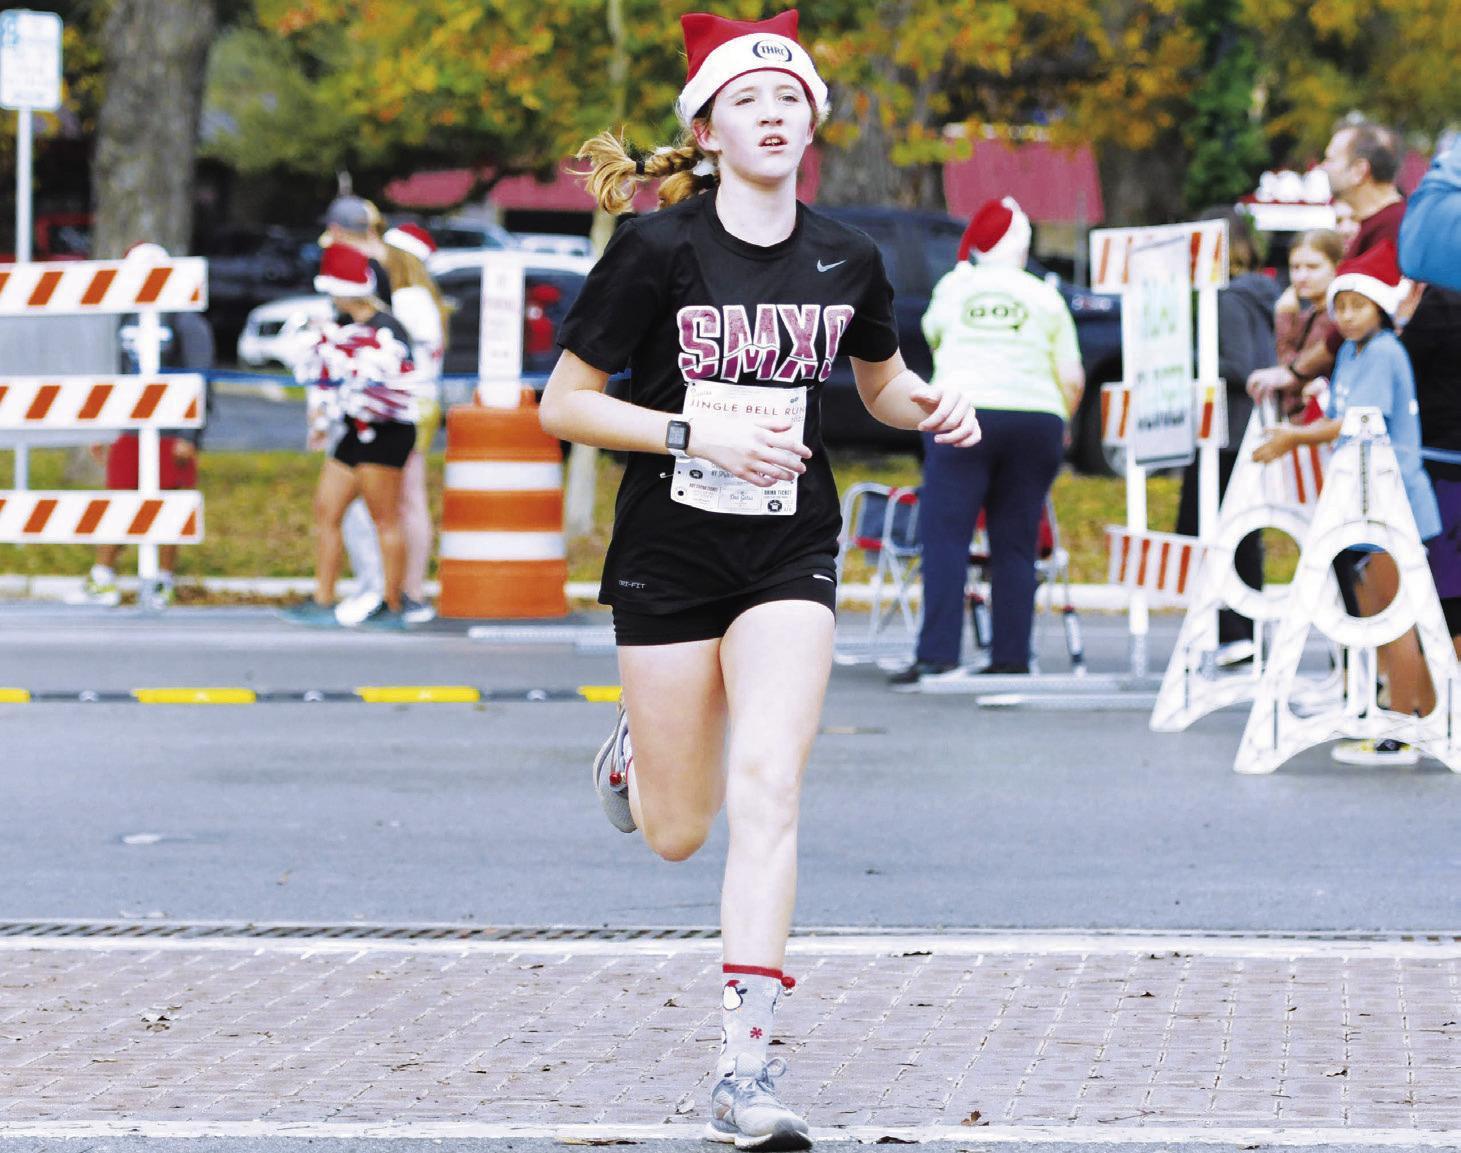 Runners compete at annual Santa’s Jingle Bell Run 5K